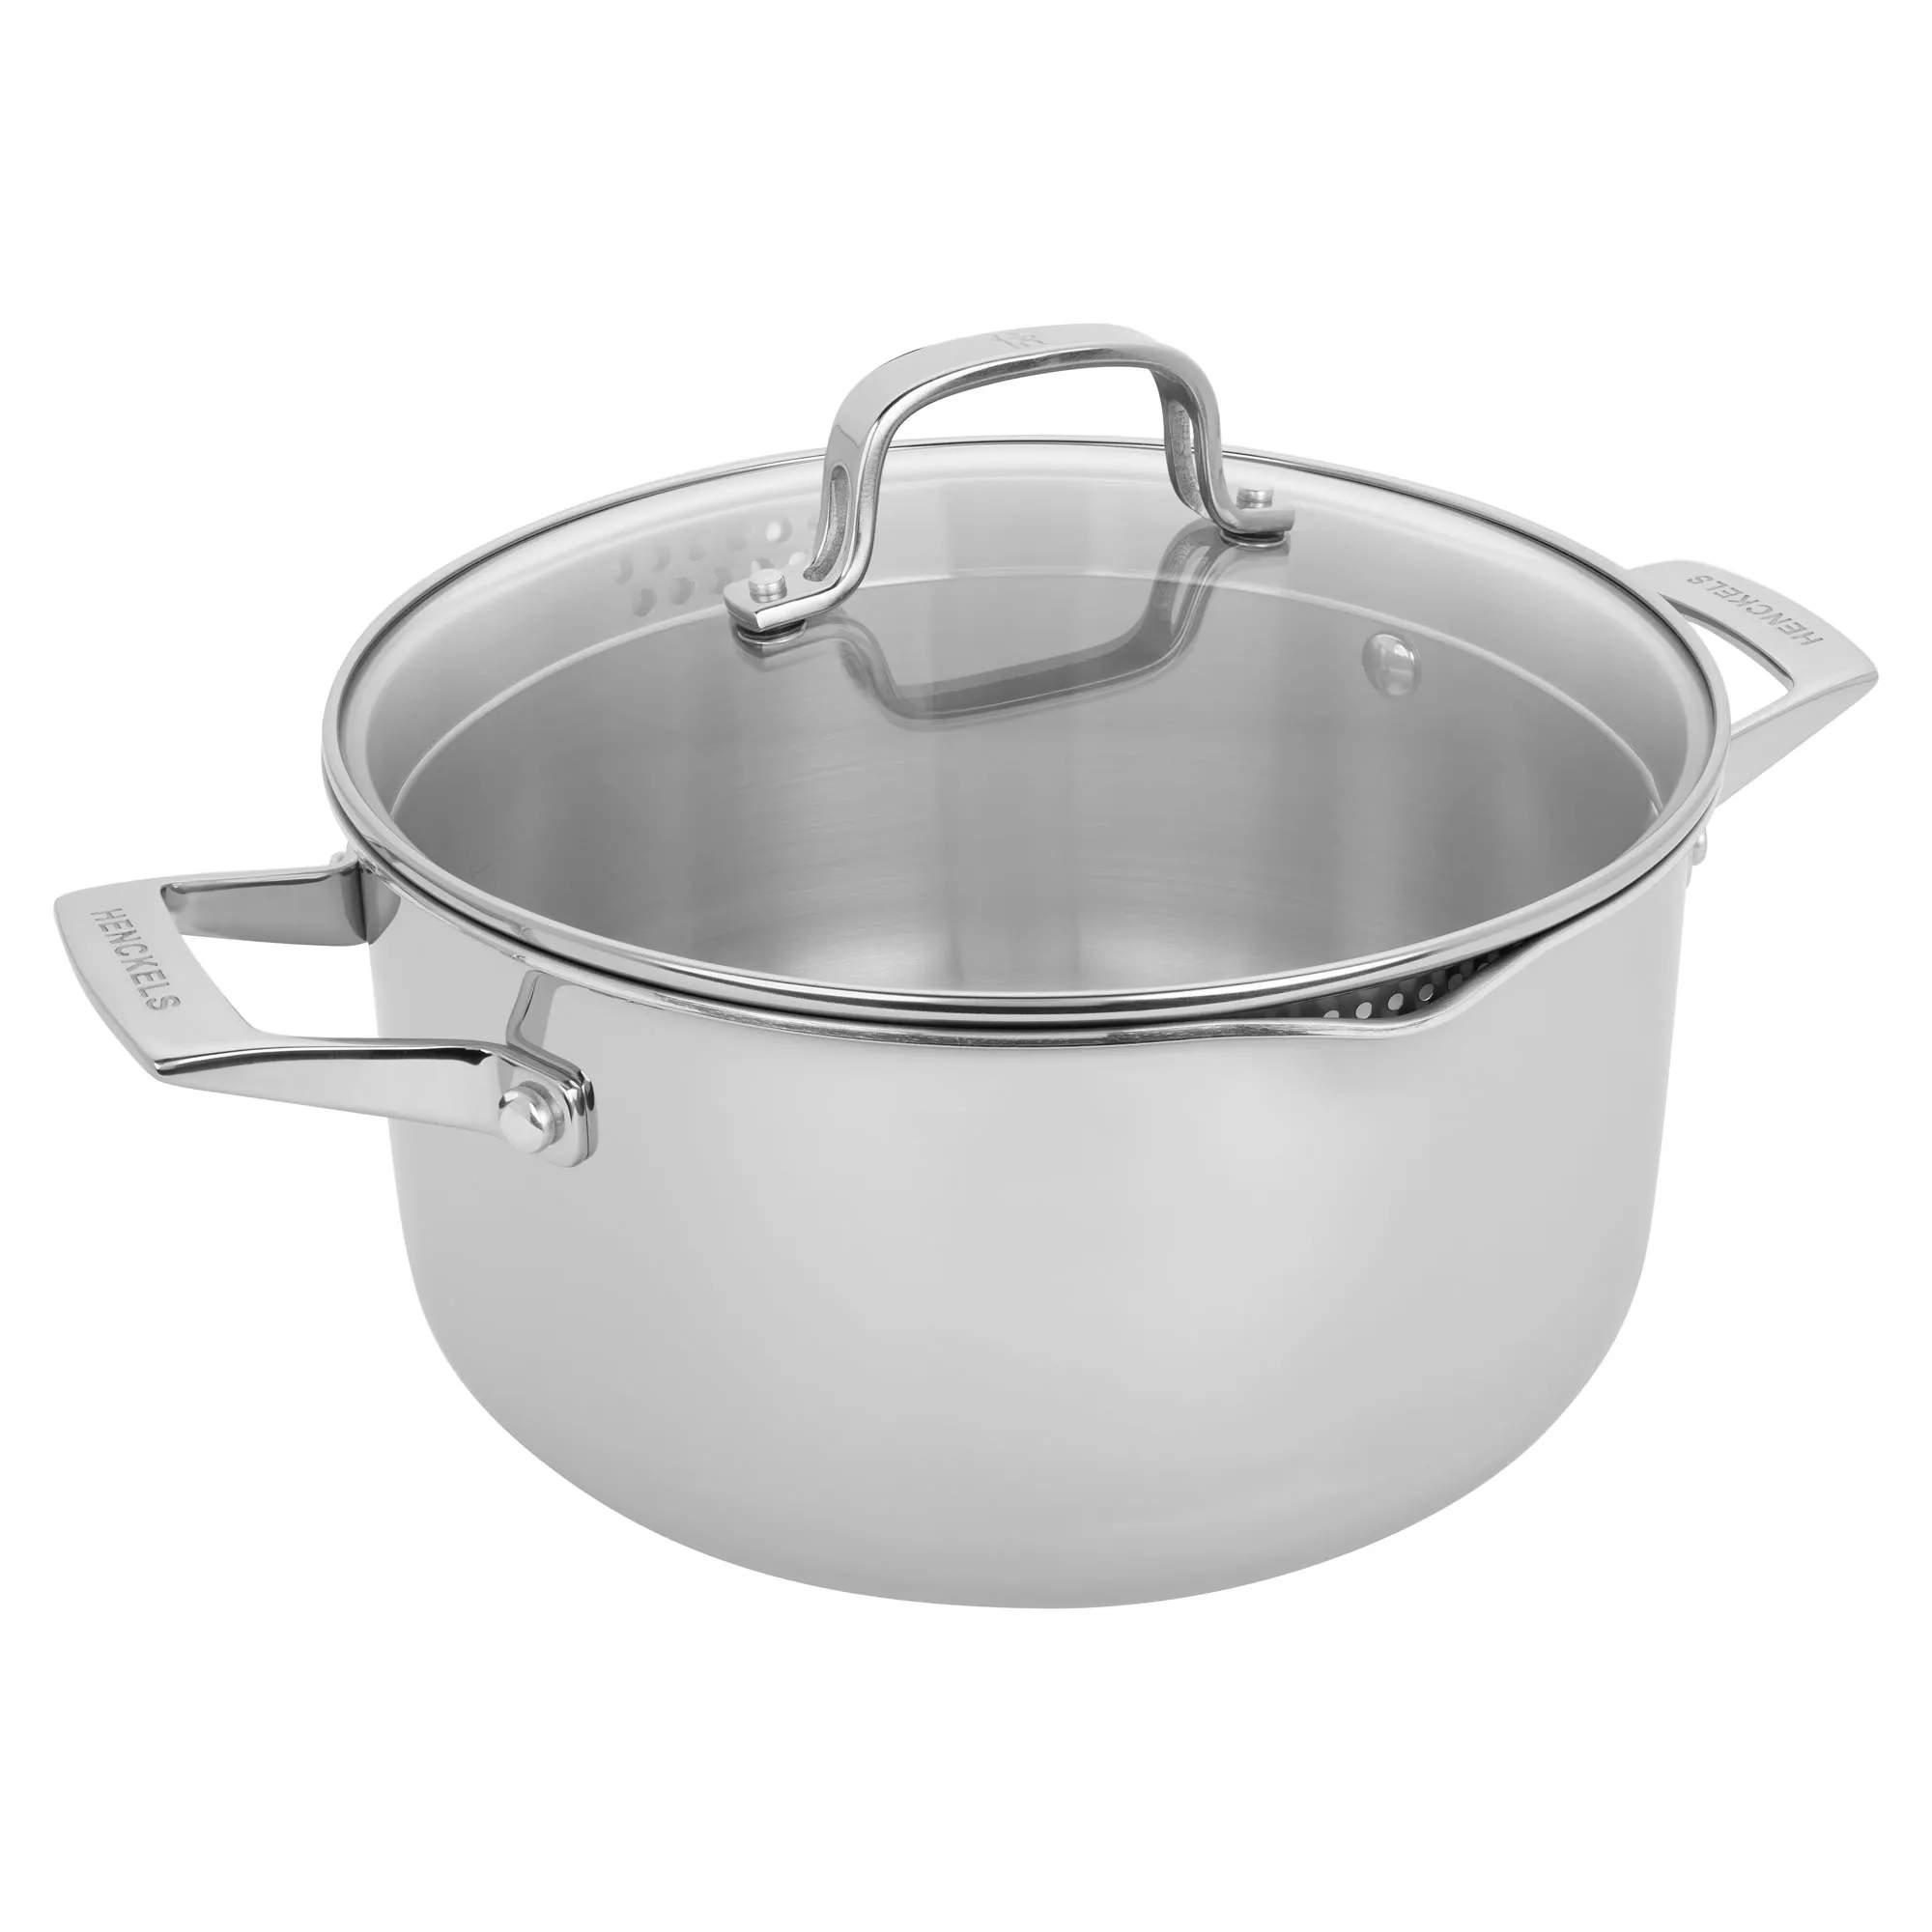 https://www.homethreads.com/files/zwilling/1023644-henckels-clad-h3-6-qt-stainless-steel-dutch-oven-with-lid.webp